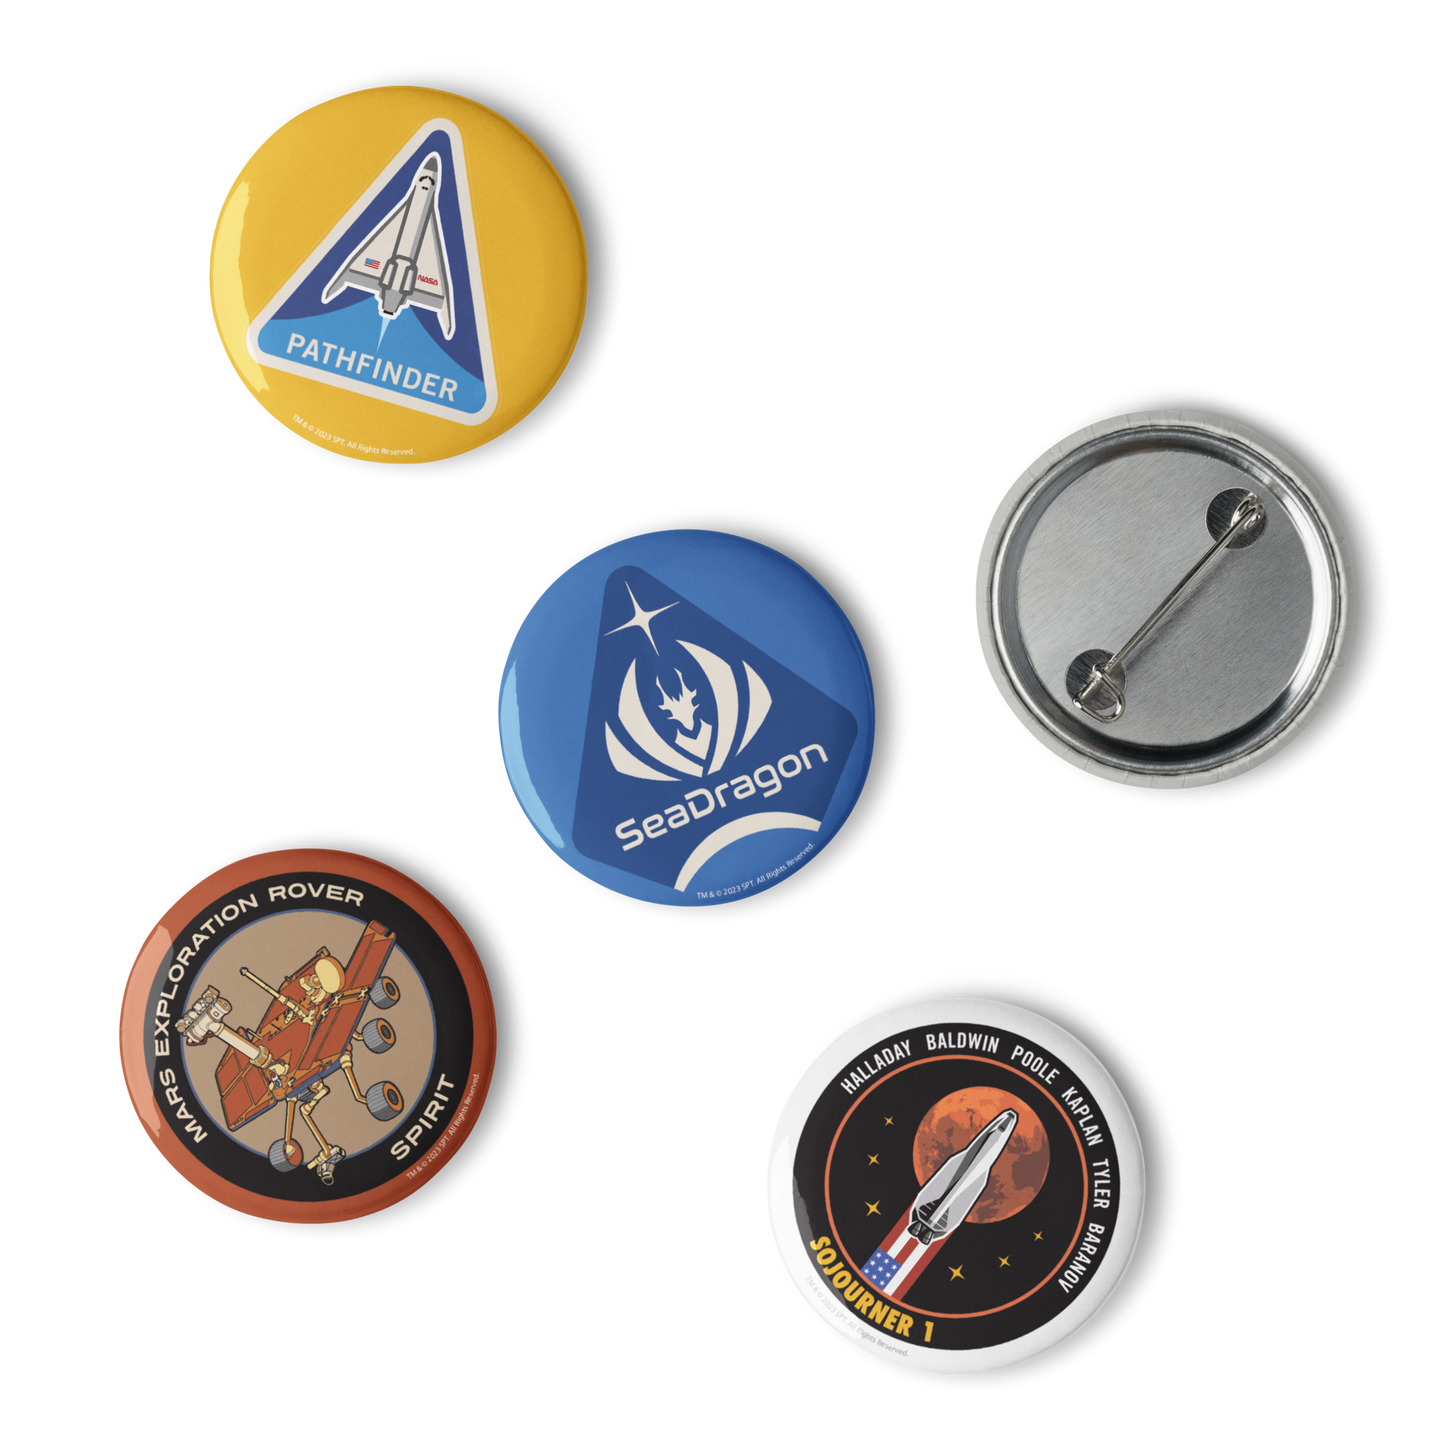 For All Mankind Pin Buttons Set 10 - Icon Heroes 